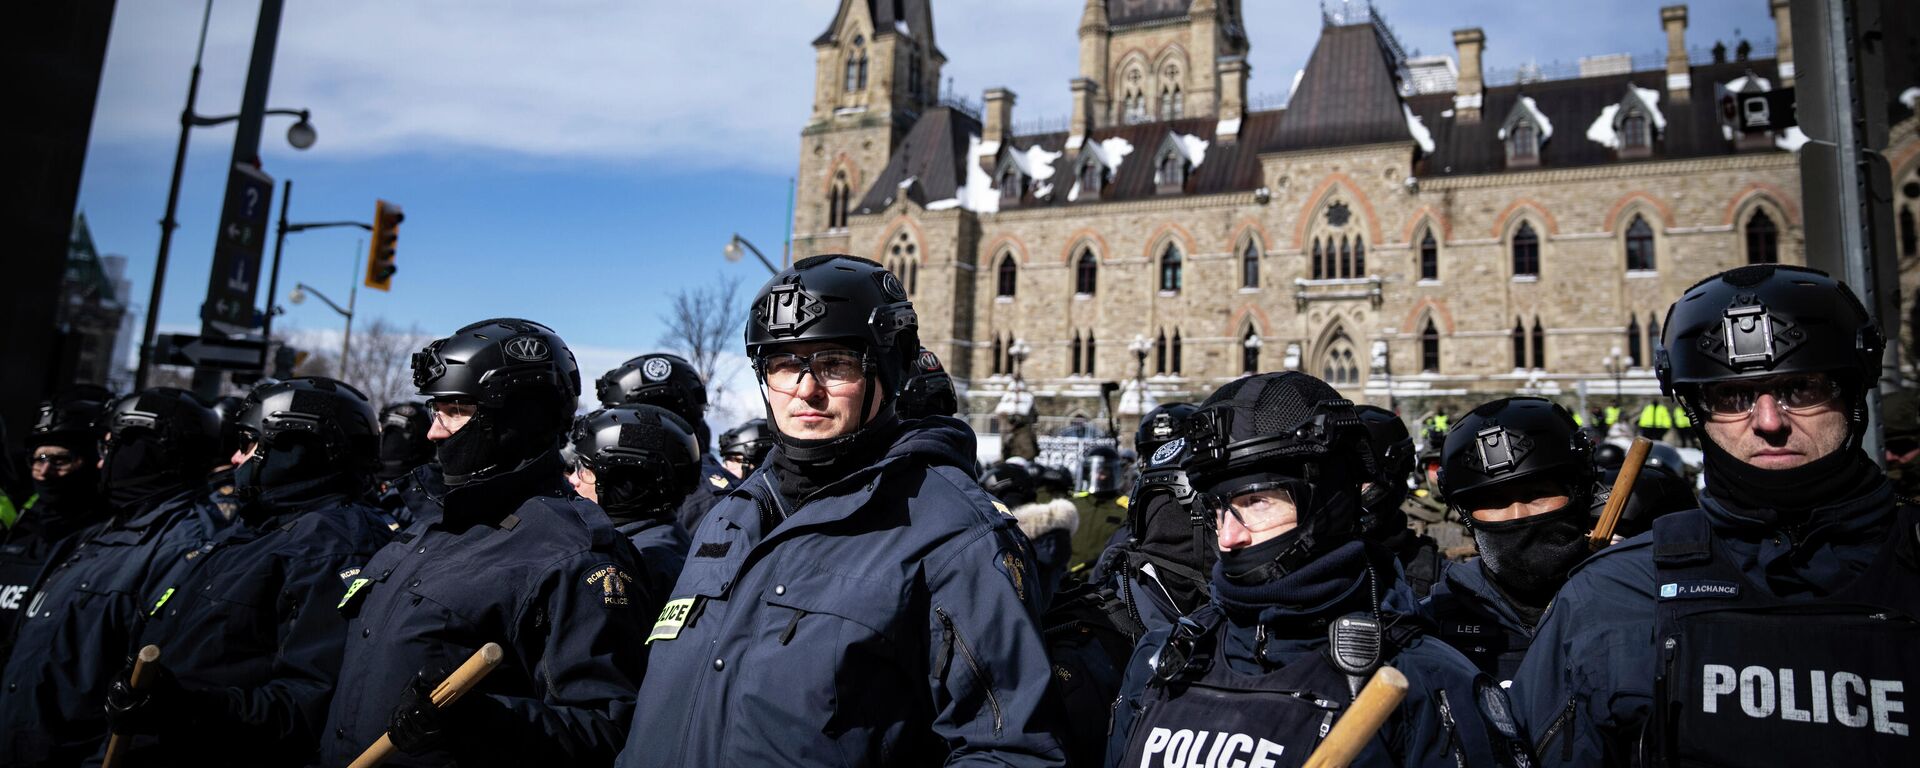 Police block protesters after taking the main street where trucks are parked in Ottawa near Parliament hill  on Saturday, Feb. 19, 2022.  Police resumed pushing back protesters on Saturday after arresting more than 100 and towing away vehicles in Canada’s besieged capital, and scores of trucks left under the pressure, raising authorities’ hopes for an end to the three-week protest against the country’s COVID-19 restrictions.  (AP Photo/Robert Bumsted) - Sputnik International, 1920, 25.04.2022